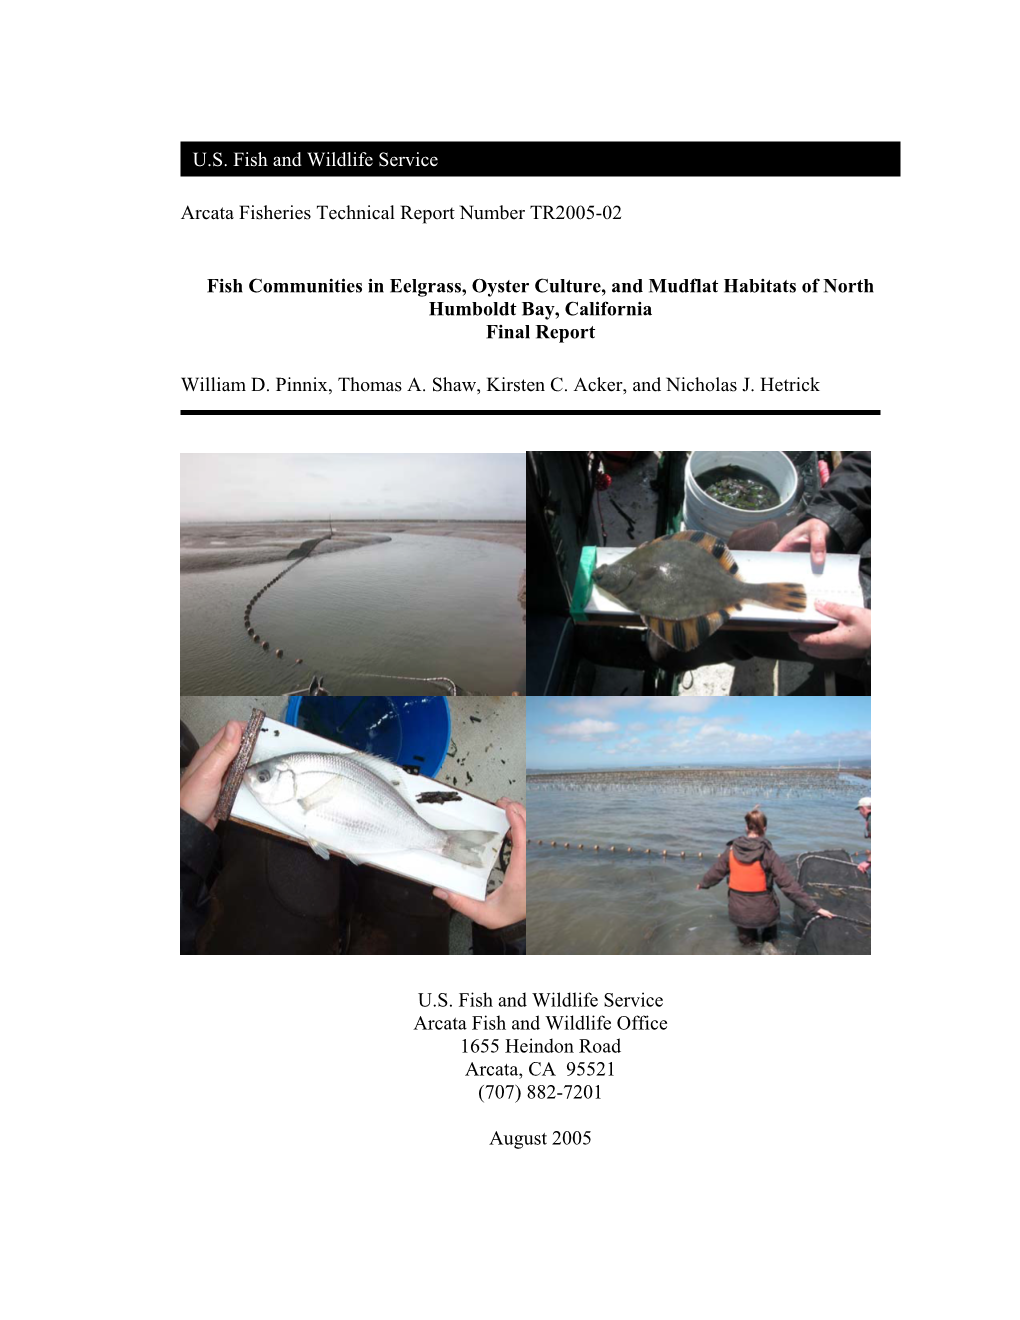 Fish Communities in Eelgrass, Oyster Culture, and Mudflat Habitats of North Humboldt Bay, California Final Report